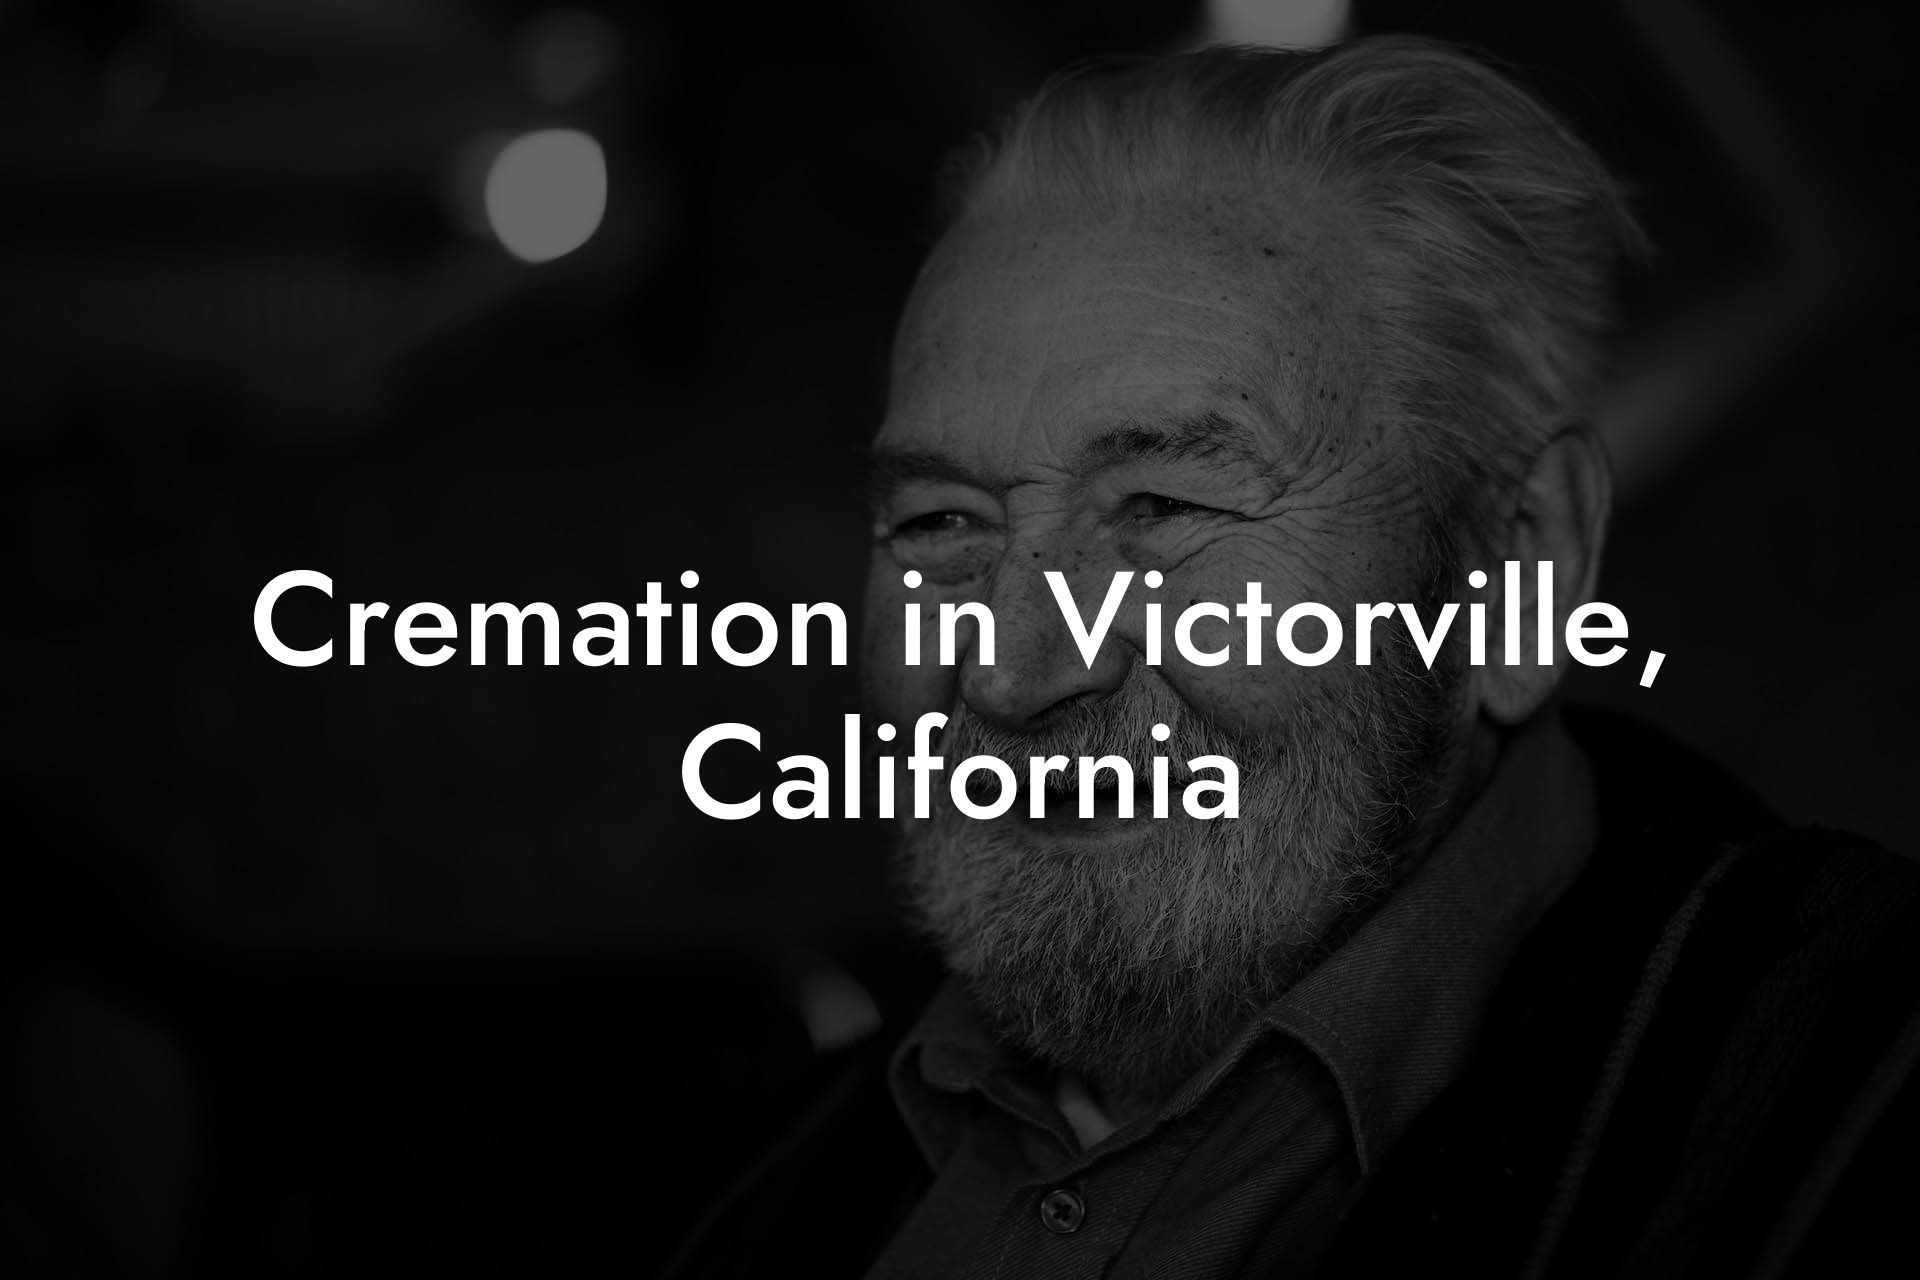 Cremation in Victorville, California